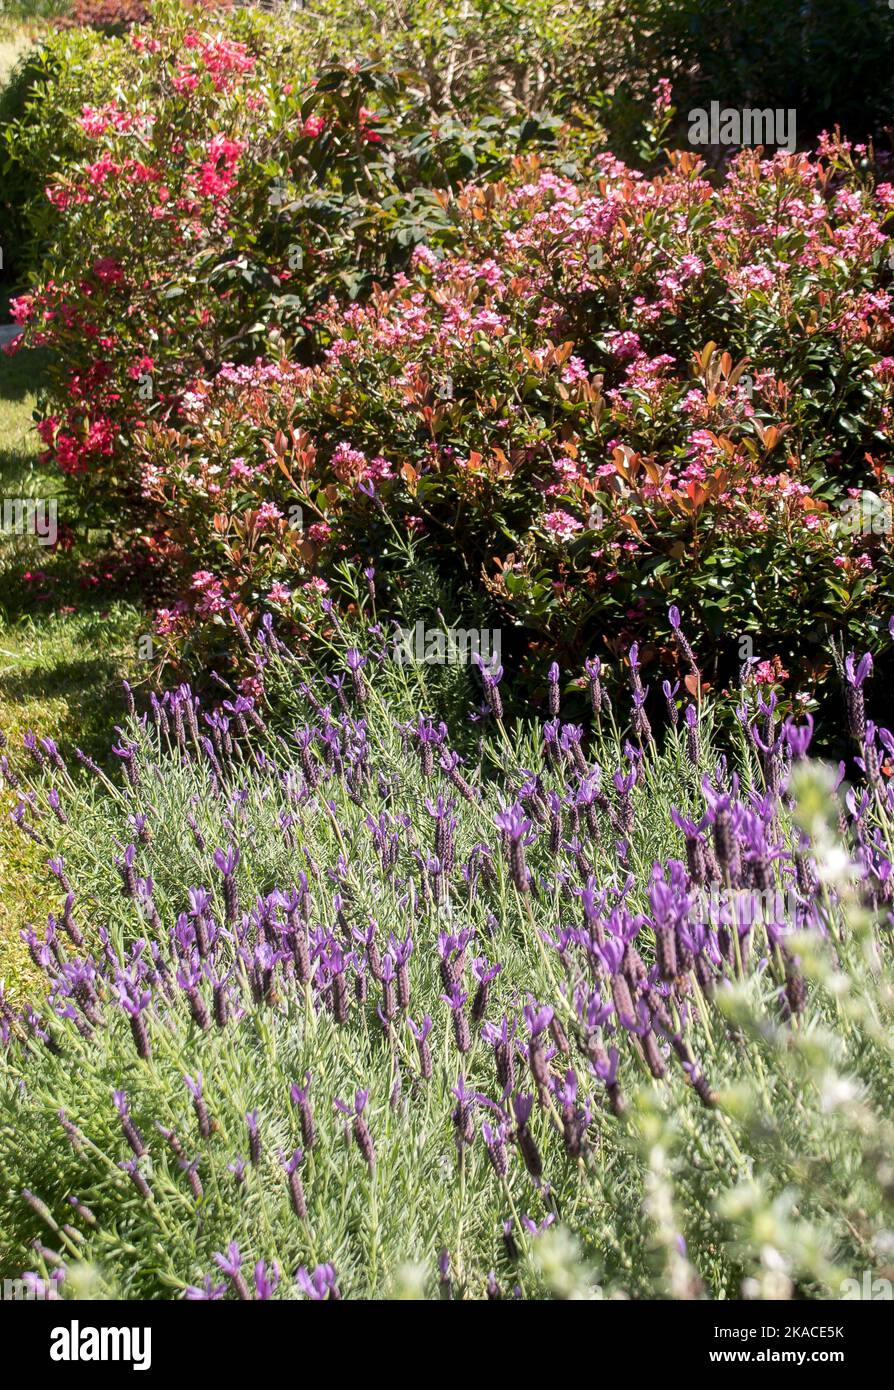 Australian private garden, Queensland. Flower bed with French lavender, Lavandula dentata; Indian hawthorn, Rhaphiolepis indica;  Vireya rhododendron. Stock Photo